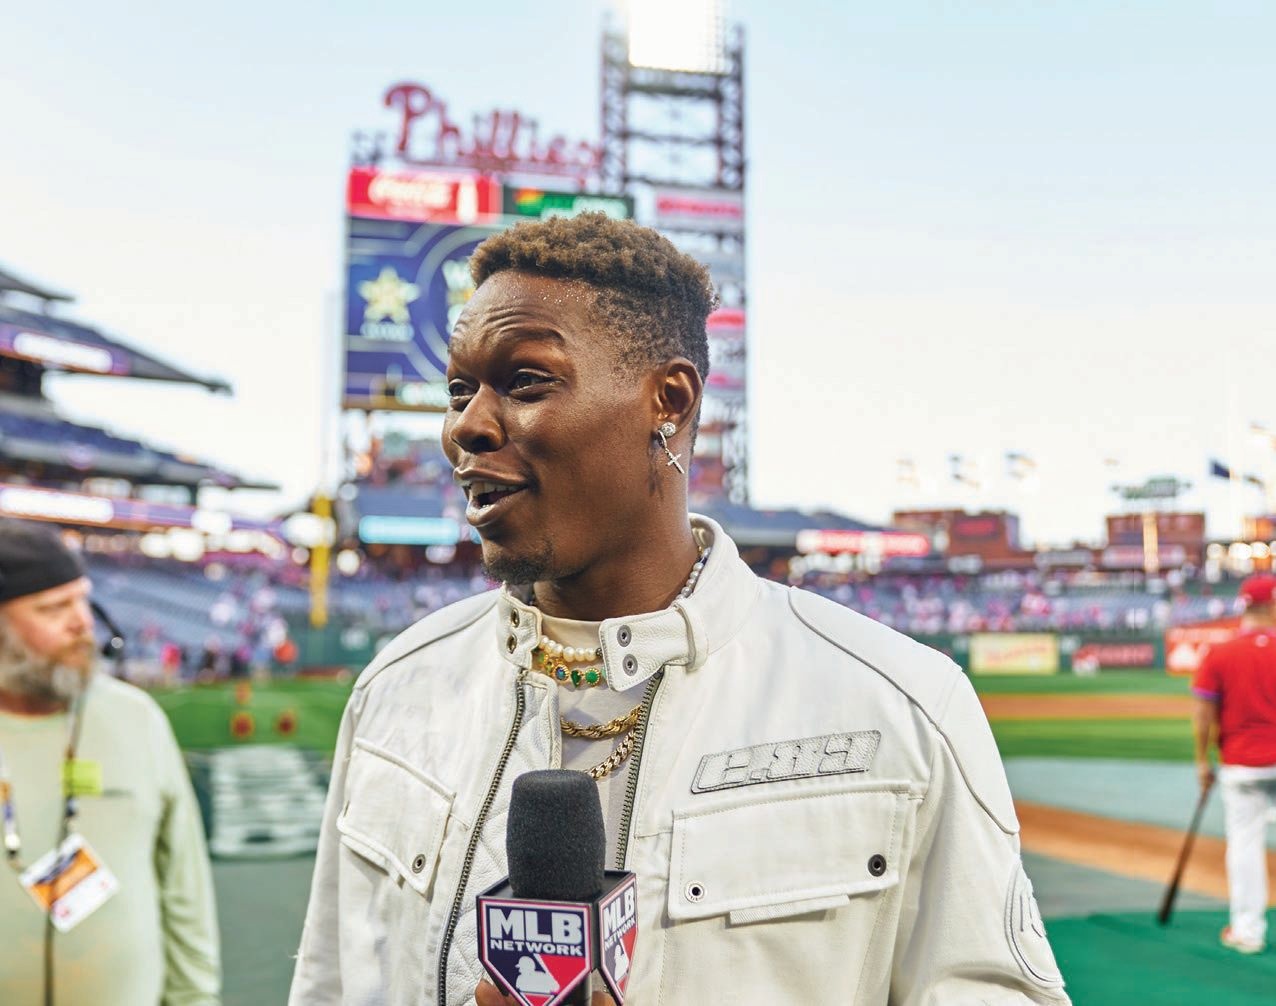 Chisholm at the World Series game between the Phillies and Astros in October 2022 PHOTO: COURTESY OF ROC NATION SPORTS